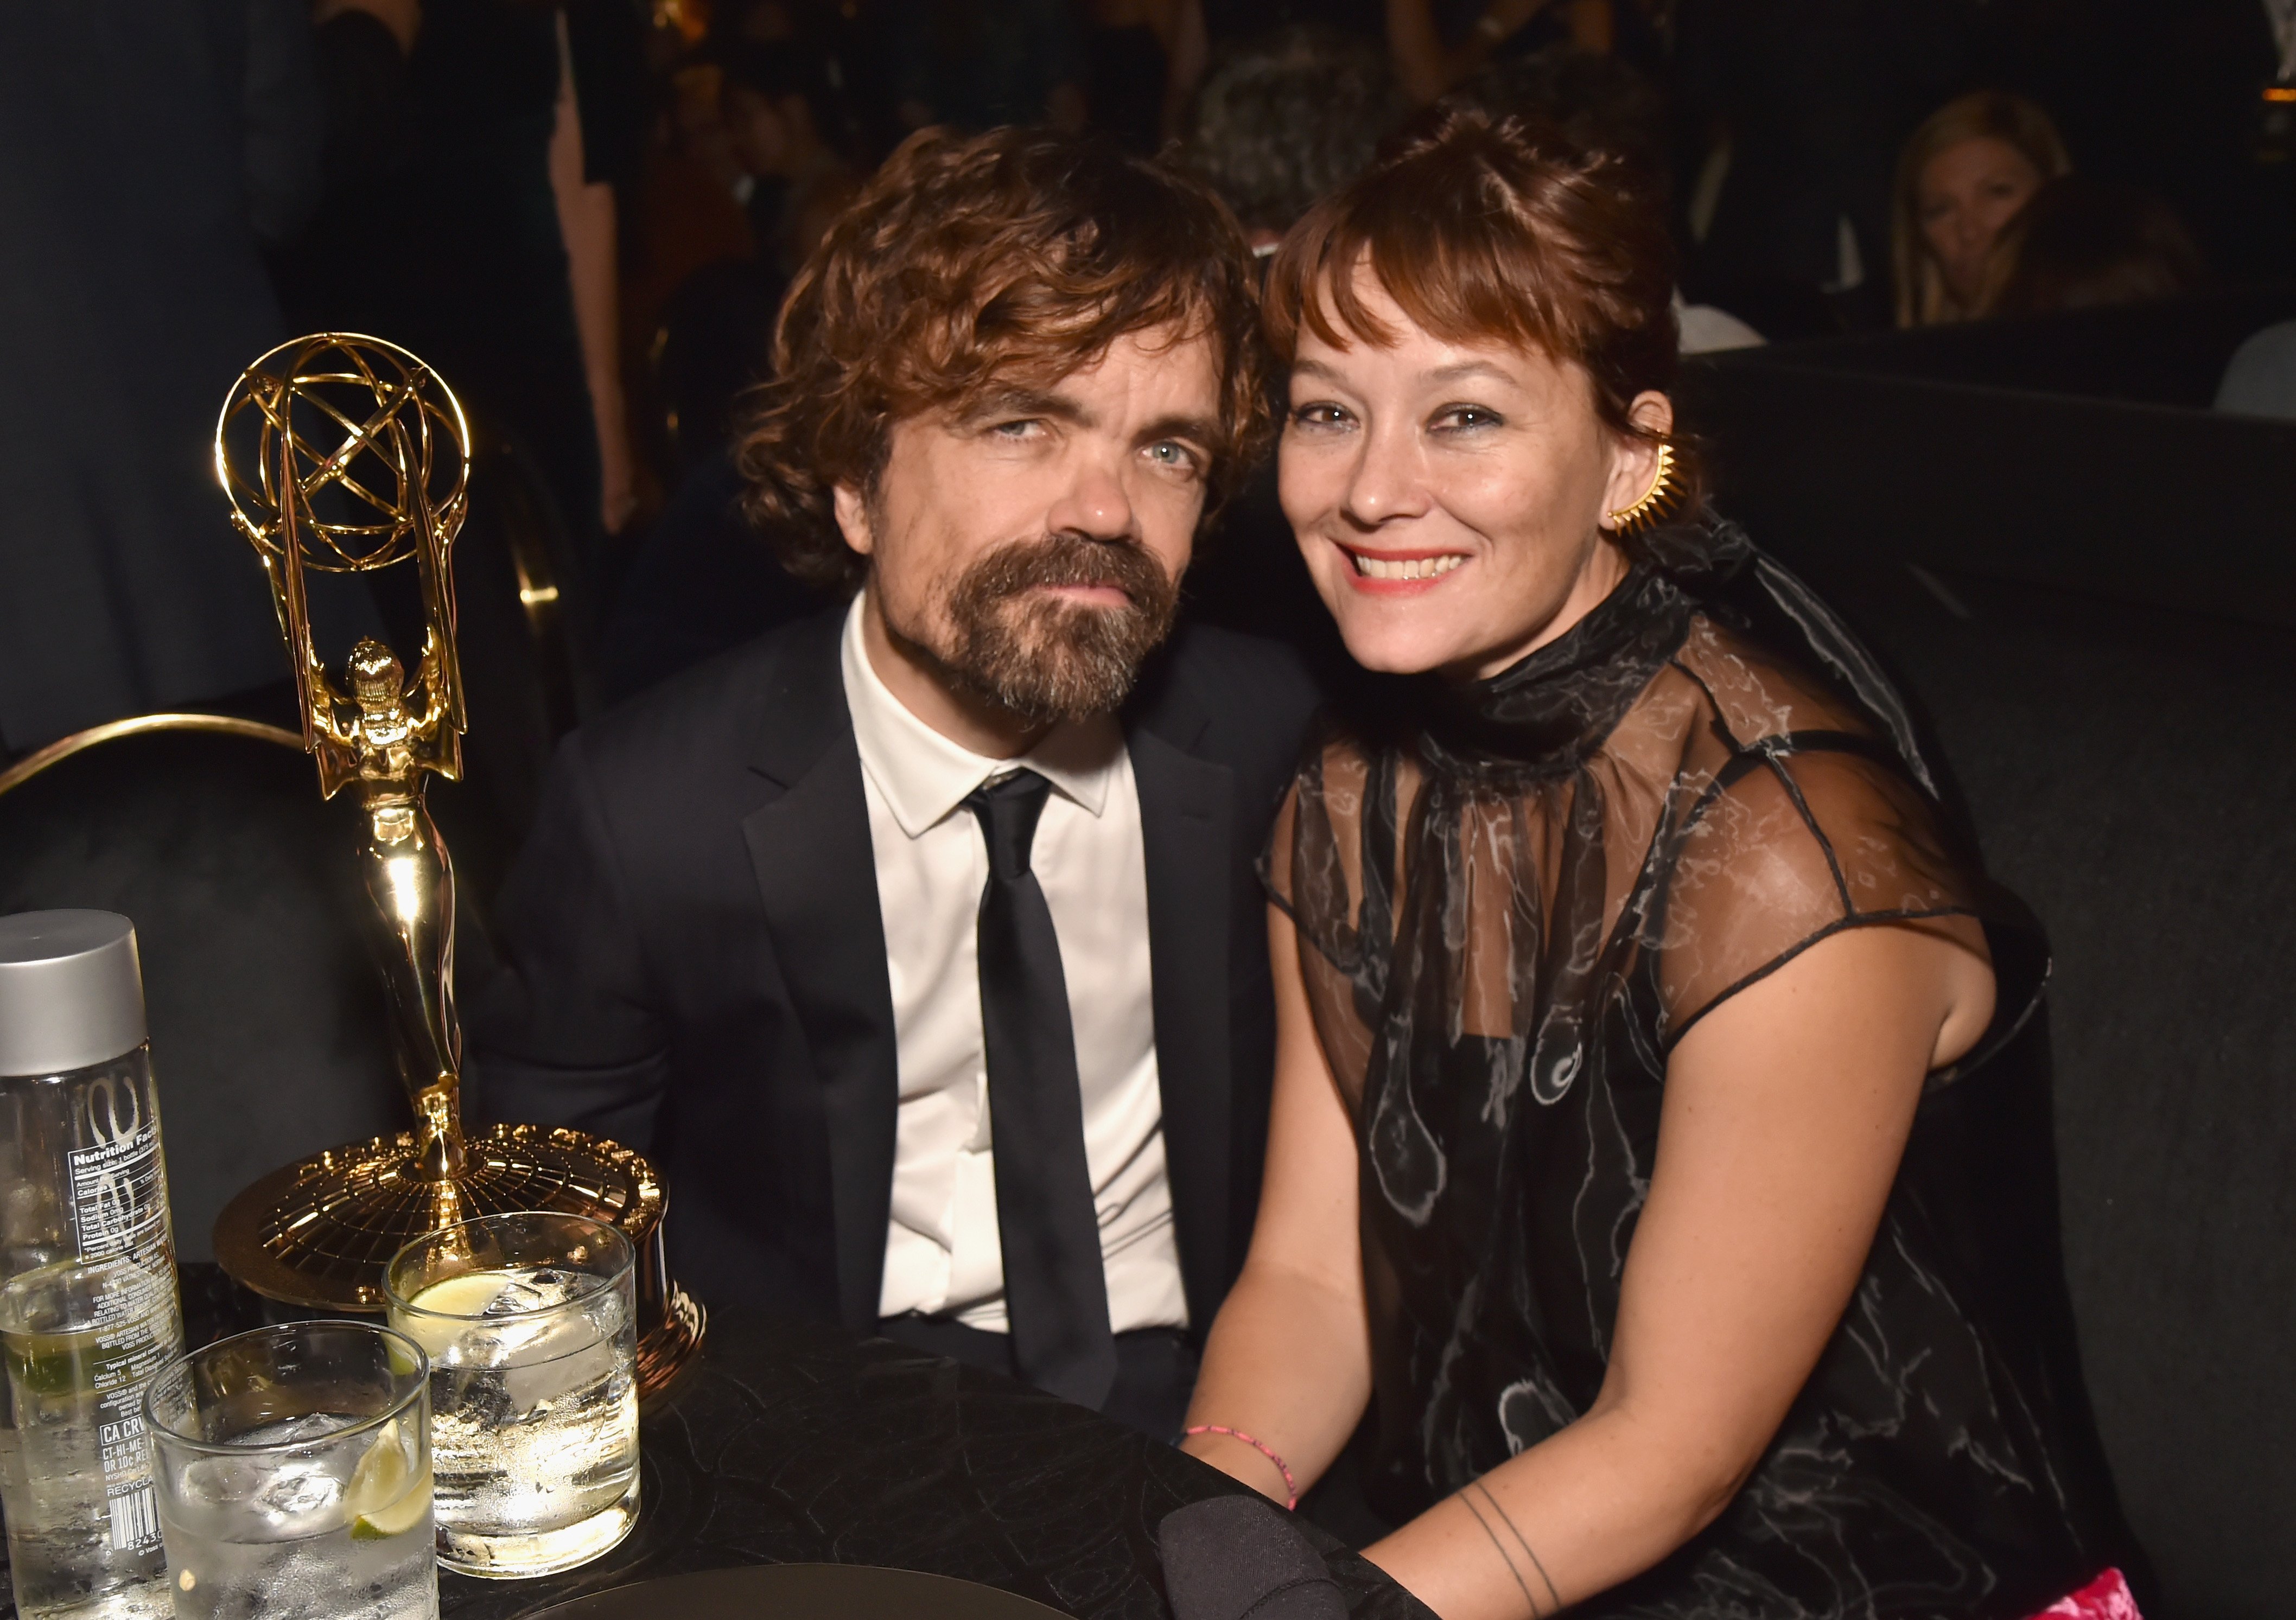 Peter Dinklage and Erica Schmidt at the 2018 Emmy After Party on September 17, 2018 in Los Angeles, California | Photo: Getty Images